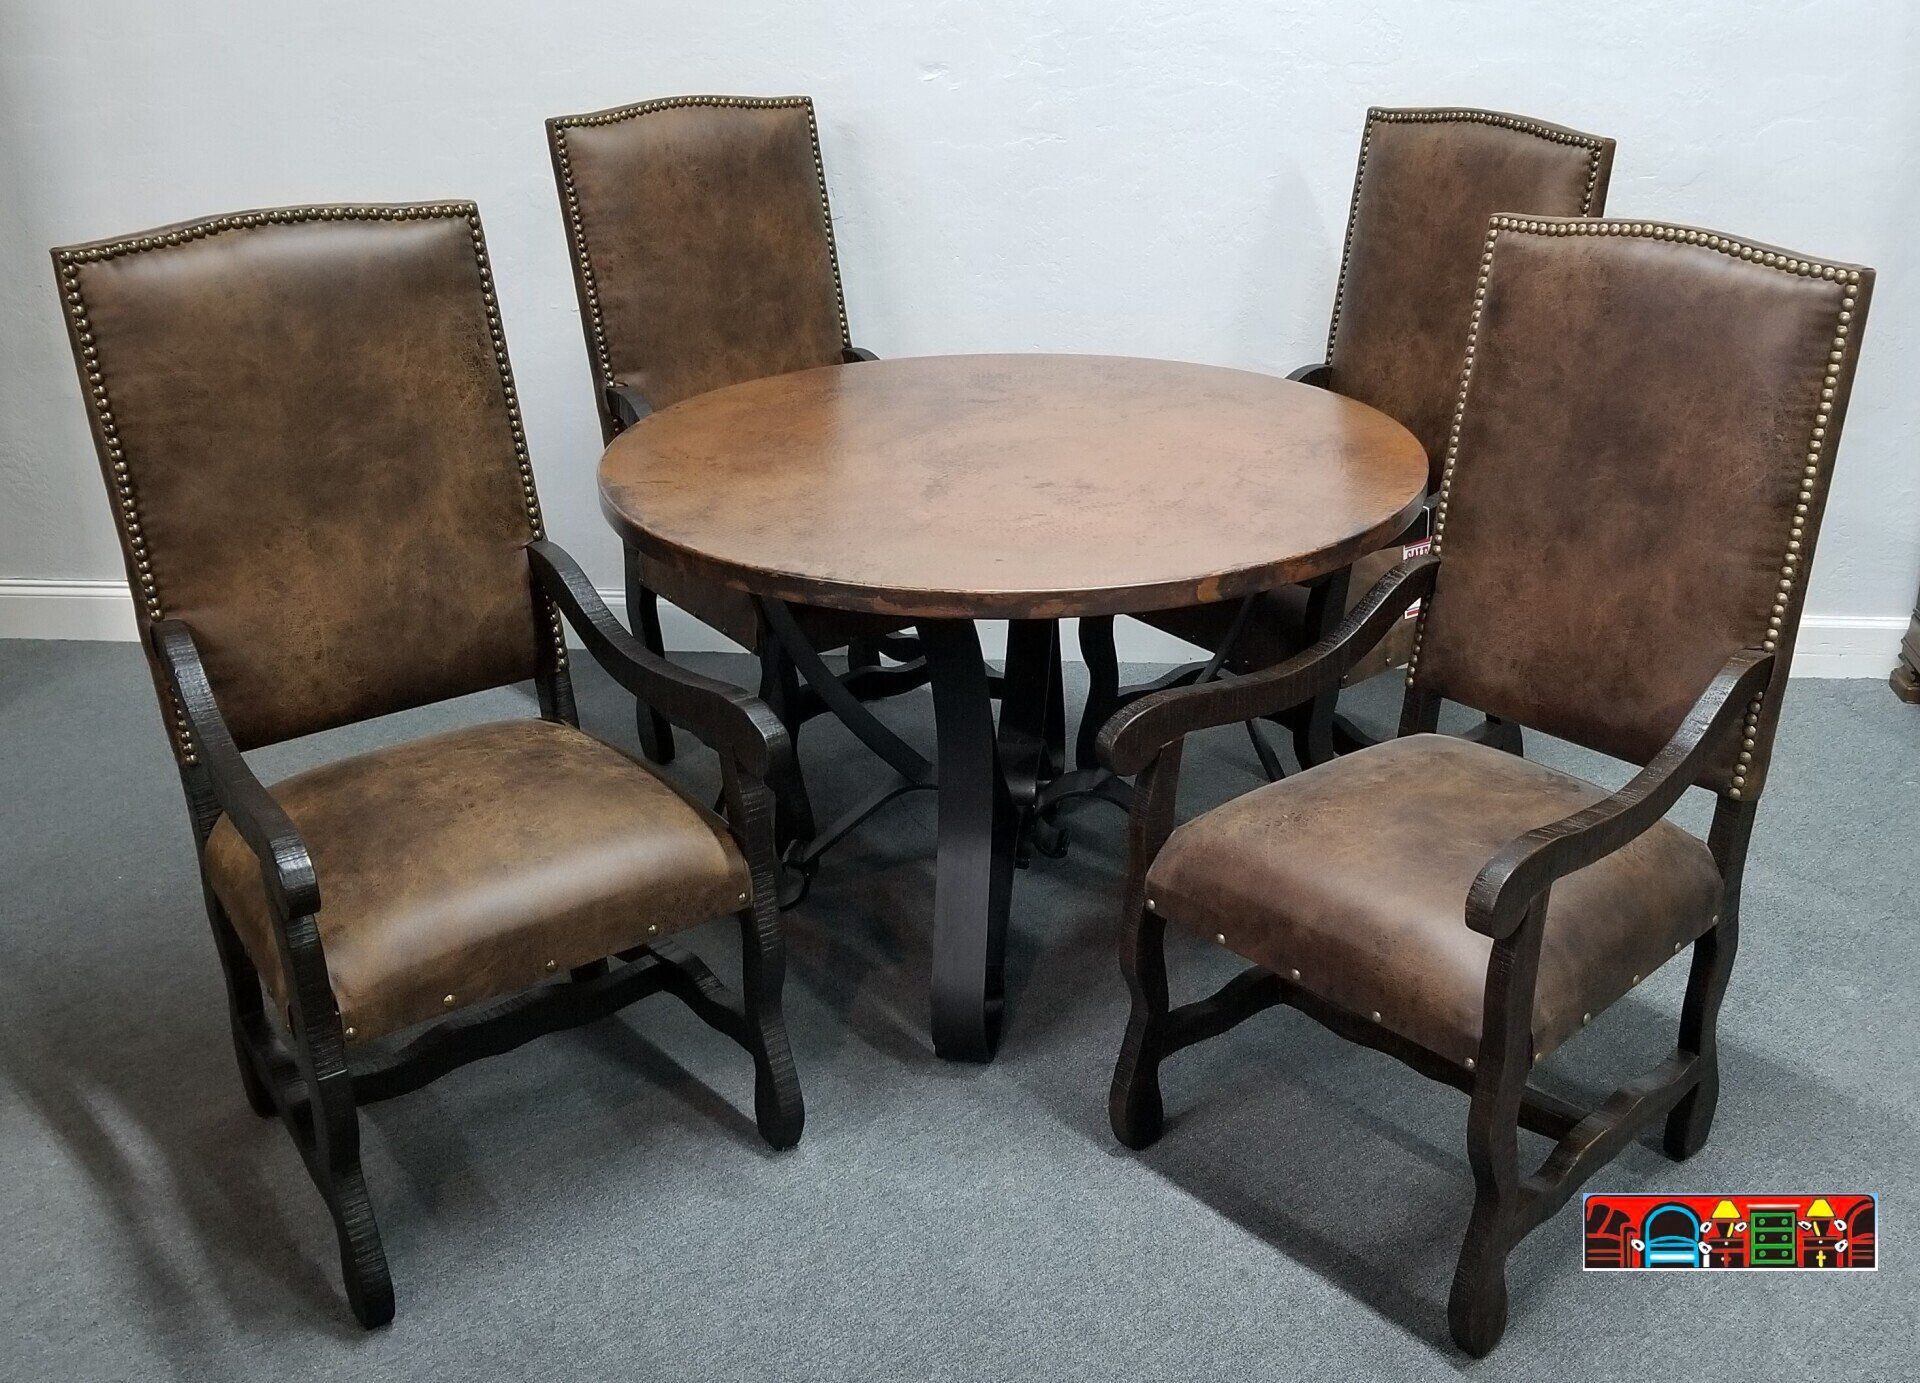 Handcrafted round copper-topped table with a black flat-iron base, accompanied by four exposed wood armchairs in dark brown, featuring medium brown cushions with nail head accents.